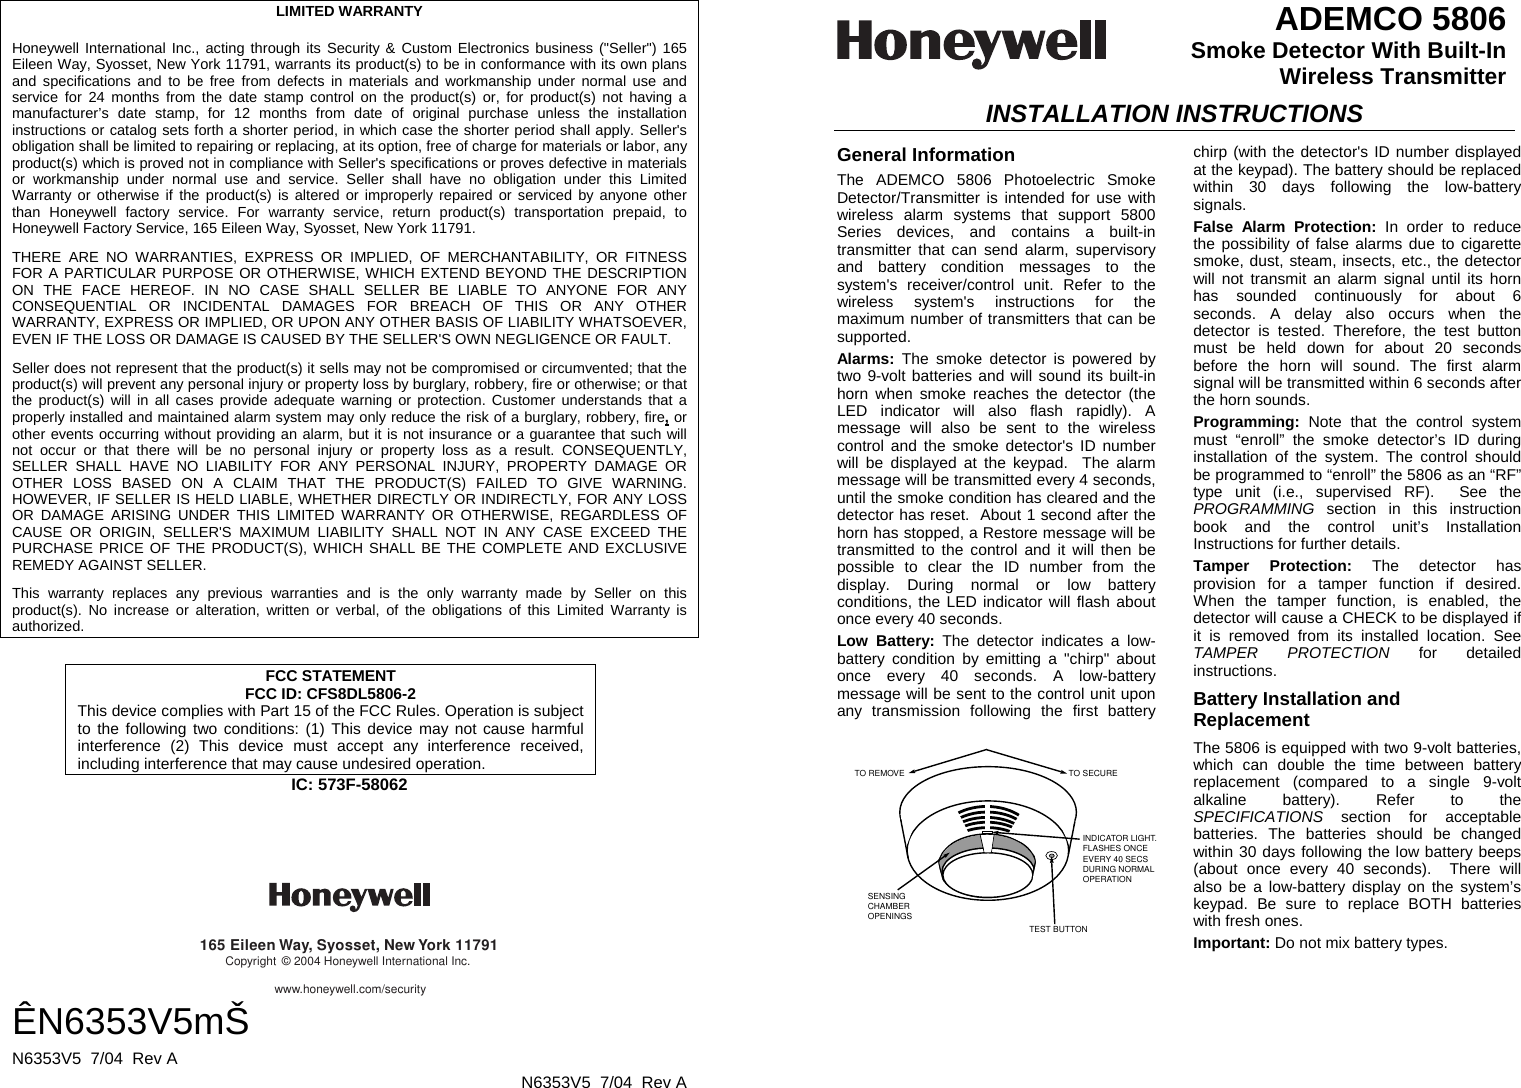      LIMITED WARRANTY  Honeywell International Inc., acting through its Security &amp; Custom Electronics business (&quot;Seller&quot;) 165 Eileen Way, Syosset, New York 11791, warrants its product(s) to be in conformance with its own plans and specifications and to be free from defects in materials and workmanship under normal use and service for 24 months from the date stamp control on the product(s) or, for product(s) not having a manufacturer’s date stamp, for 12 months from date of original purchase unless the installation instructions or catalog sets forth a shorter period, in which case the shorter period shall apply. Seller&apos;s obligation shall be limited to repairing or replacing, at its option, free of charge for materials or labor, any product(s) which is proved not in compliance with Seller&apos;s specifications or proves defective in materials or workmanship under normal use and service. Seller shall have no obligation under this Limited Warranty or otherwise if the product(s) is altered or improperly repaired or serviced by anyone other than Honeywell factory service. For warranty service, return product(s) transportation prepaid, to Honeywell Factory Service, 165 Eileen Way, Syosset, New York 11791. THERE ARE NO WARRANTIES, EXPRESS OR IMPLIED, OF MERCHANTABILITY, OR FITNESS FOR A PARTICULAR PURPOSE OR OTHERWISE, WHICH EXTEND BEYOND THE DESCRIPTION ON THE FACE HEREOF. IN NO CASE SHALL SELLER BE LIABLE TO ANYONE FOR ANY CONSEQUENTIAL OR INCIDENTAL DAMAGES FOR BREACH OF THIS OR ANY OTHER WARRANTY, EXPRESS OR IMPLIED, OR UPON ANY OTHER BASIS OF LIABILITY WHATSOEVER, EVEN IF THE LOSS OR DAMAGE IS CAUSED BY THE SELLER&apos;S OWN NEGLIGENCE OR FAULT. Seller does not represent that the product(s) it sells may not be compromised or circumvented; that the product(s) will prevent any personal injury or property loss by burglary, robbery, fire or otherwise; or that the product(s) will in all cases provide adequate warning or protection. Customer understands that a properly installed and maintained alarm system may only reduce the risk of a burglary, robbery, fire, or other events occurring without providing an alarm, but it is not insurance or a guarantee that such will not occur or that there will be no personal injury or property loss as a result. CONSEQUENTLY, SELLER SHALL HAVE NO LIABILITY FOR ANY PERSONAL INJURY, PROPERTY DAMAGE OR OTHER LOSS BASED ON A CLAIM THAT THE PRODUCT(S) FAILED TO GIVE WARNING. HOWEVER, IF SELLER IS HELD LIABLE, WHETHER DIRECTLY OR INDIRECTLY, FOR ANY LOSS OR DAMAGE ARISING UNDER THIS LIMITED WARRANTY OR OTHERWISE, REGARDLESS OF CAUSE OR ORIGIN, SELLER&apos;S MAXIMUM LIABILITY SHALL NOT IN ANY CASE EXCEED THE PURCHASE PRICE OF THE PRODUCT(S), WHICH SHALL BE THE COMPLETE AND EXCLUSIVE REMEDY AGAINST SELLER. This warranty replaces any previous warranties and is the only warranty made by Seller on this product(s). No increase or alteration, written or verbal, of the obligations of this Limited Warranty is authorized.  FCC STATEMENT FCC ID: CFS8DL5806-2 This device complies with Part 15 of the FCC Rules. Operation is subject to the following two conditions: (1) This device may not cause harmful interference (2) This device must accept any interference received, including interference that may cause undesired operation. IC: 573F-58062     165 Eileen Way, Syosset, New York 11791Copyright © 2004 Honeywell International Inc.www.honeywell.com/security ÊN6353V5mŠ N6353V5  7/04  Rev A   N6353V5  7/04  Rev A  ADEMCO 5806 Smoke Detector With Built-In  Wireless Transmitter  INSTALLATION INSTRUCTIONS General Information The ADEMCO 5806 Photoelectric Smoke Detector/Transmitter is intended for use with wireless alarm systems that support 5800 Series devices, and contains a built-in transmitter that can send alarm, supervisory and battery condition messages to the system&apos;s receiver/control unit. Refer to the wireless system&apos;s instructions for the maximum number of transmitters that can be supported. Alarms:  The smoke detector is powered by two 9-volt batteries and will sound its built-in horn when smoke reaches the detector (the LED indicator will also flash rapidly). A message will also be sent to the wireless control and the smoke detector&apos;s ID number will be displayed at the keypad.  The alarm message will be transmitted every 4 seconds, until the smoke condition has cleared and the detector has reset.  About 1 second after the horn has stopped, a Restore message will be transmitted to the control and it will then be possible to clear the ID number from the display. During normal or low battery conditions, the LED indicator will flash about once every 40 seconds. Low Battery: The detector indicates a low-battery condition by emitting a &quot;chirp&quot; about once every 40 seconds. A low-battery message will be sent to the control unit upon any transmission following the first battery   chirp (with the detector&apos;s ID number displayed at the keypad). The battery should be replaced within 30 days following the low-battery signals. False Alarm Protection: In order to reduce the possibility of false alarms due to cigarette smoke, dust, steam, insects, etc., the detector will not transmit an alarm signal until its horn has sounded continuously for about 6 seconds. A delay also occurs when the detector is tested. Therefore, the test button must be held down for about 20 seconds before the horn will sound. The first alarm signal will be transmitted within 6 seconds after the horn sounds.  Programming:  Note that the control system must “enroll” the smoke detector’s ID during installation of the system. The control should be programmed to “enroll” the 5806 as an “RF” type unit (i.e., supervised RF).  See the PROGRAMMING section in this instruction book and the control unit’s Installation Instructions for further details. Tamper Protection: The detector has provision for a tamper function if desired. When the tamper function, is enabled, the detector will cause a CHECK to be displayed if it is removed from its installed location. See TAMPER PROTECTION for detailed instructions. Battery Installation and Replacement  TO REMOVE TO SECUREINDICATOR LIGHT.FLASHES ONCEEVERY 40 SECSDURING NORMALOPERATIONTEST BUTTONSENSING CHAMBEROPENINGS The 5806 is equipped with two 9-volt batteries, which can double the time between battery replacement (compared to a single 9-volt alkaline battery). Refer to the SPECIFICATIONS section for acceptable batteries. The batteries should be changed within 30 days following the low battery beeps (about once every 40 seconds).  There will also be a low-battery display on the system’s keypad. Be sure to replace BOTH batteries with fresh ones. Important: Do not mix battery types. 